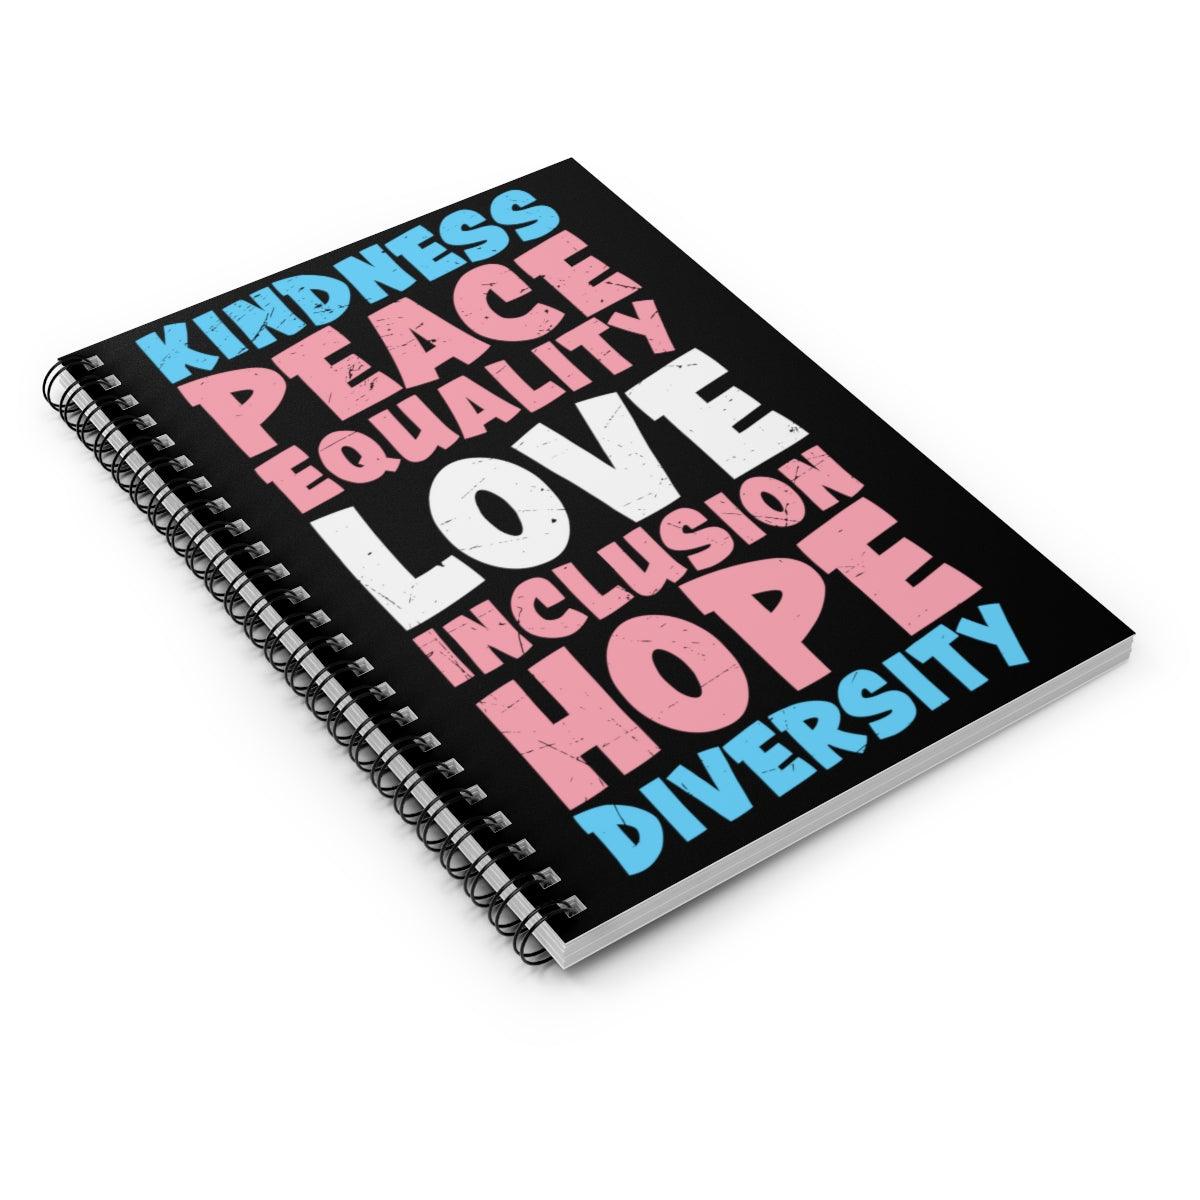 Kindness, Peace, Equality, Love, Inclusion, Hope Diversity - Notebook - Wicked Naughty Apparel